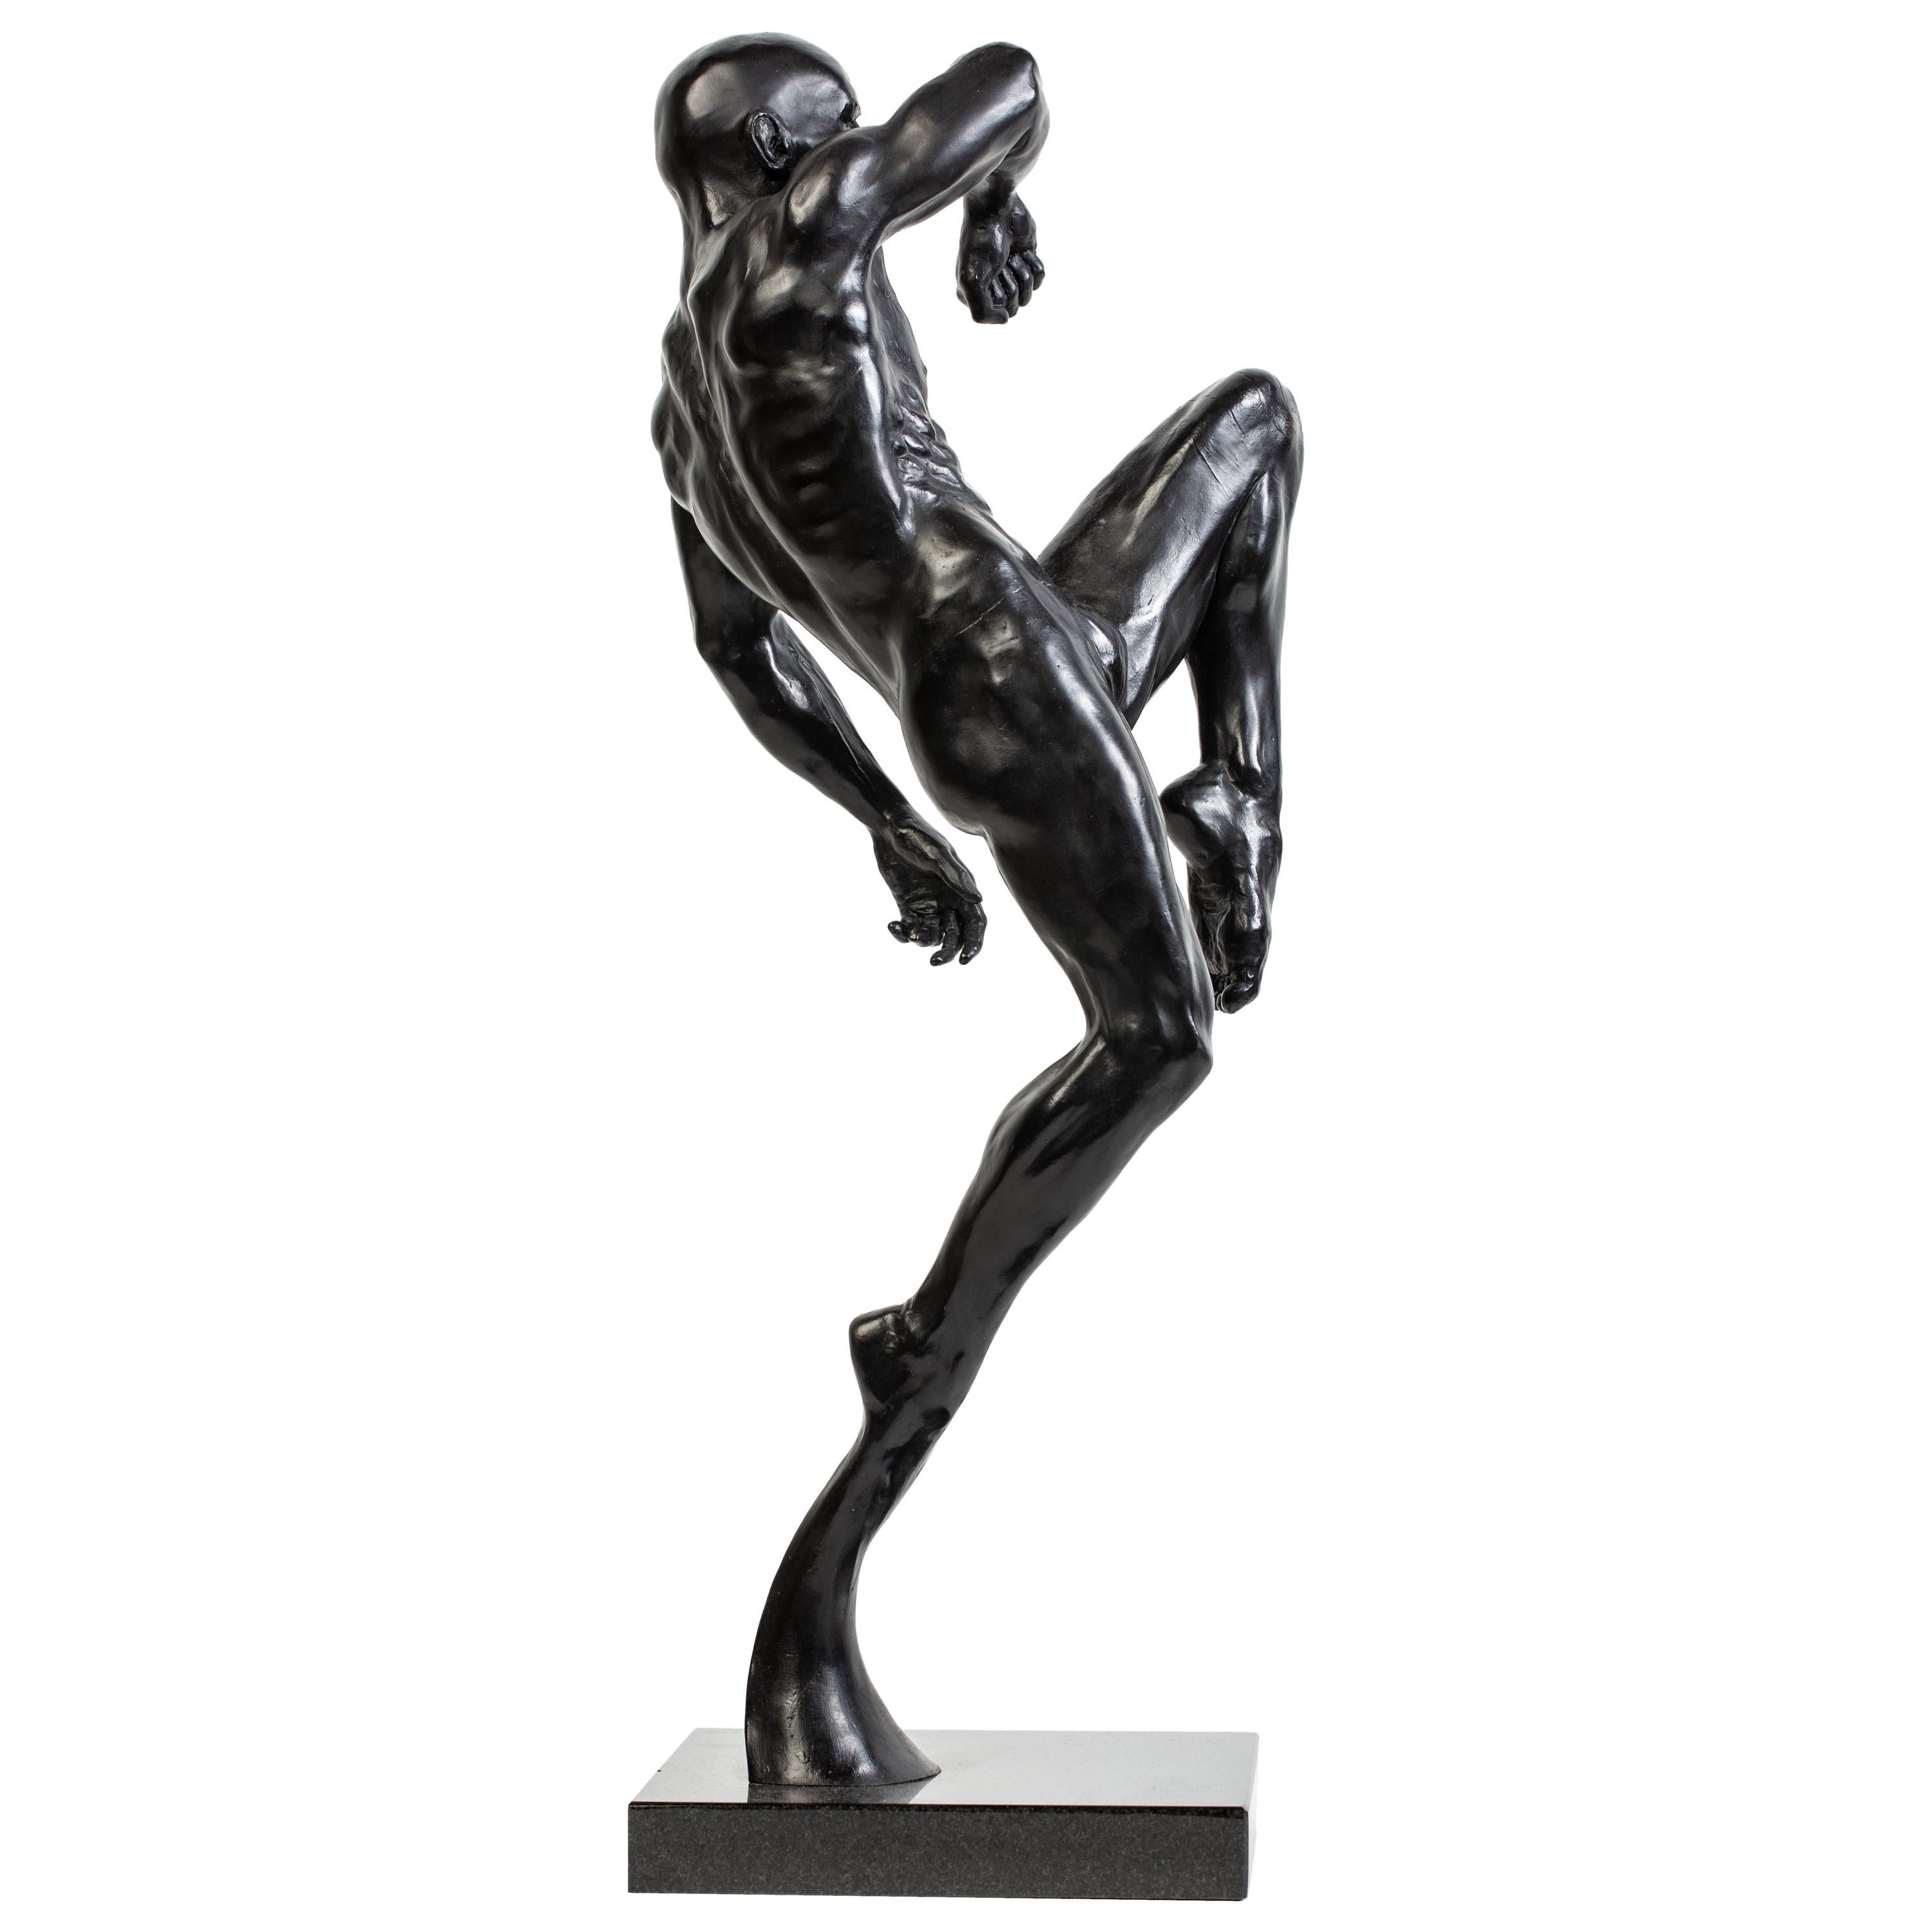 Ancient Art, Athletic Male Nude Dynamic Figure , Bronze Sculpture by Dean Kugler